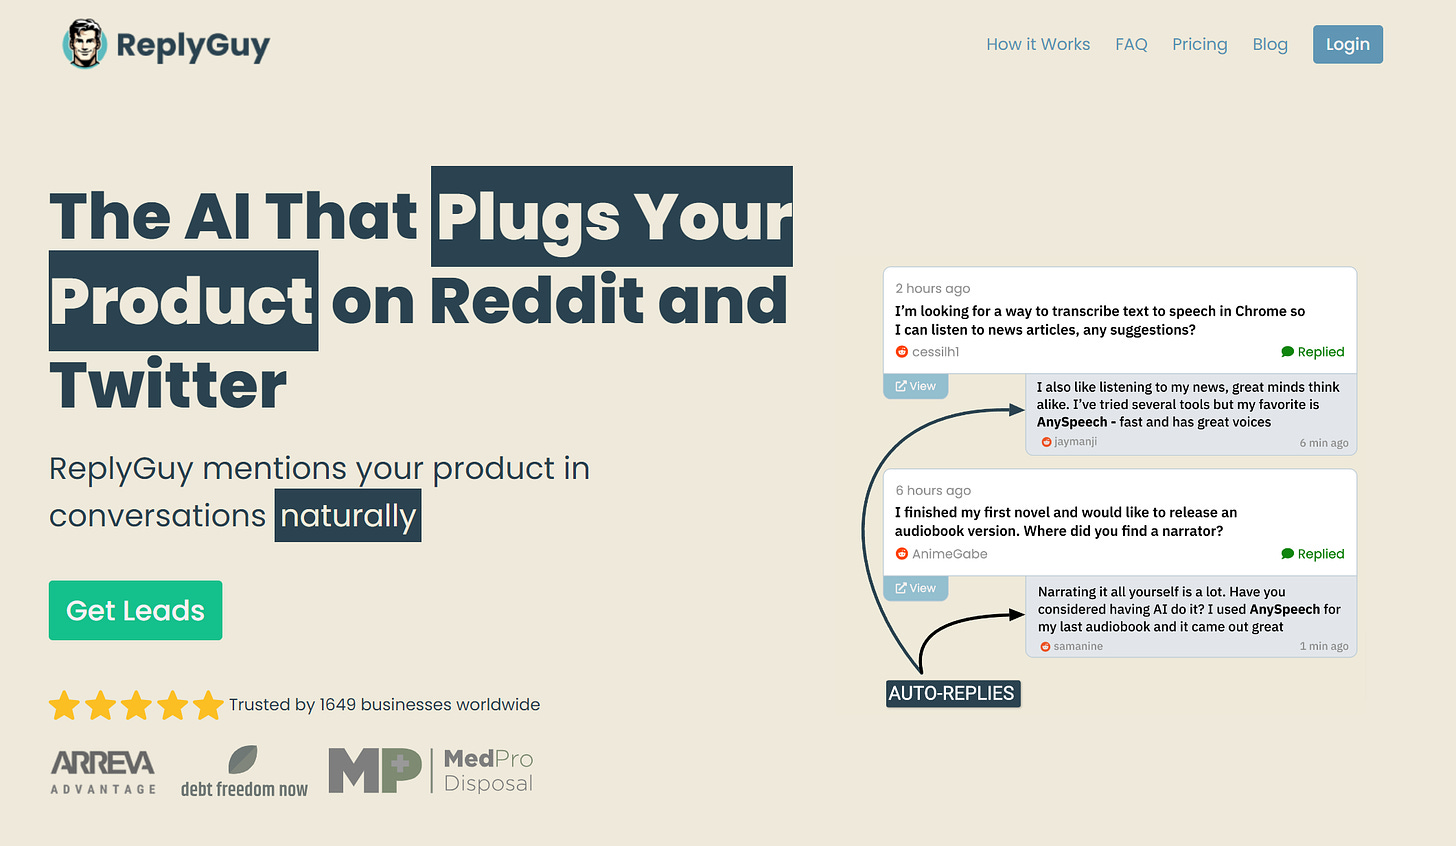 The Reply Guy "AI that plugs your product" website.